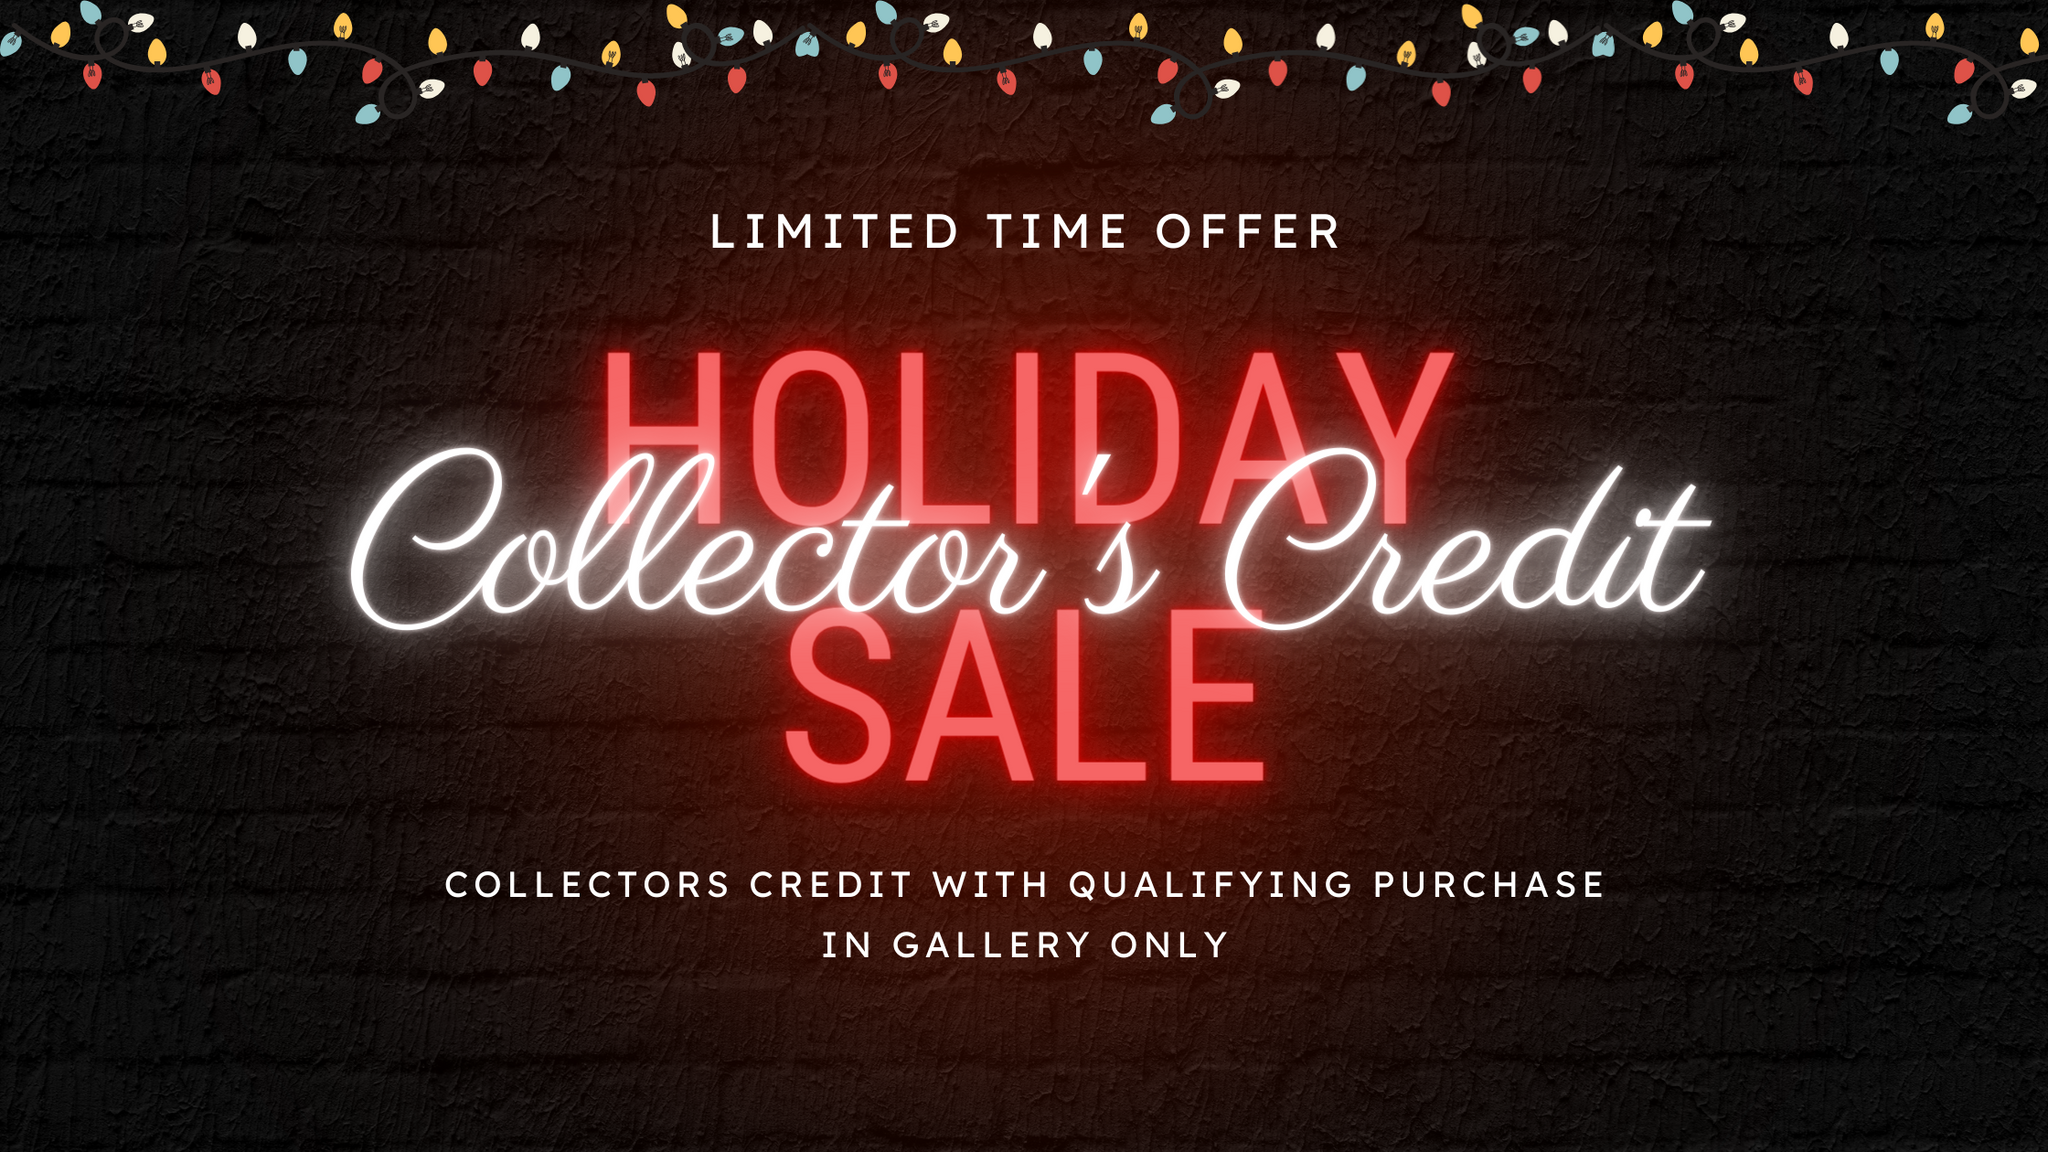 Collector's Credits are BACK!